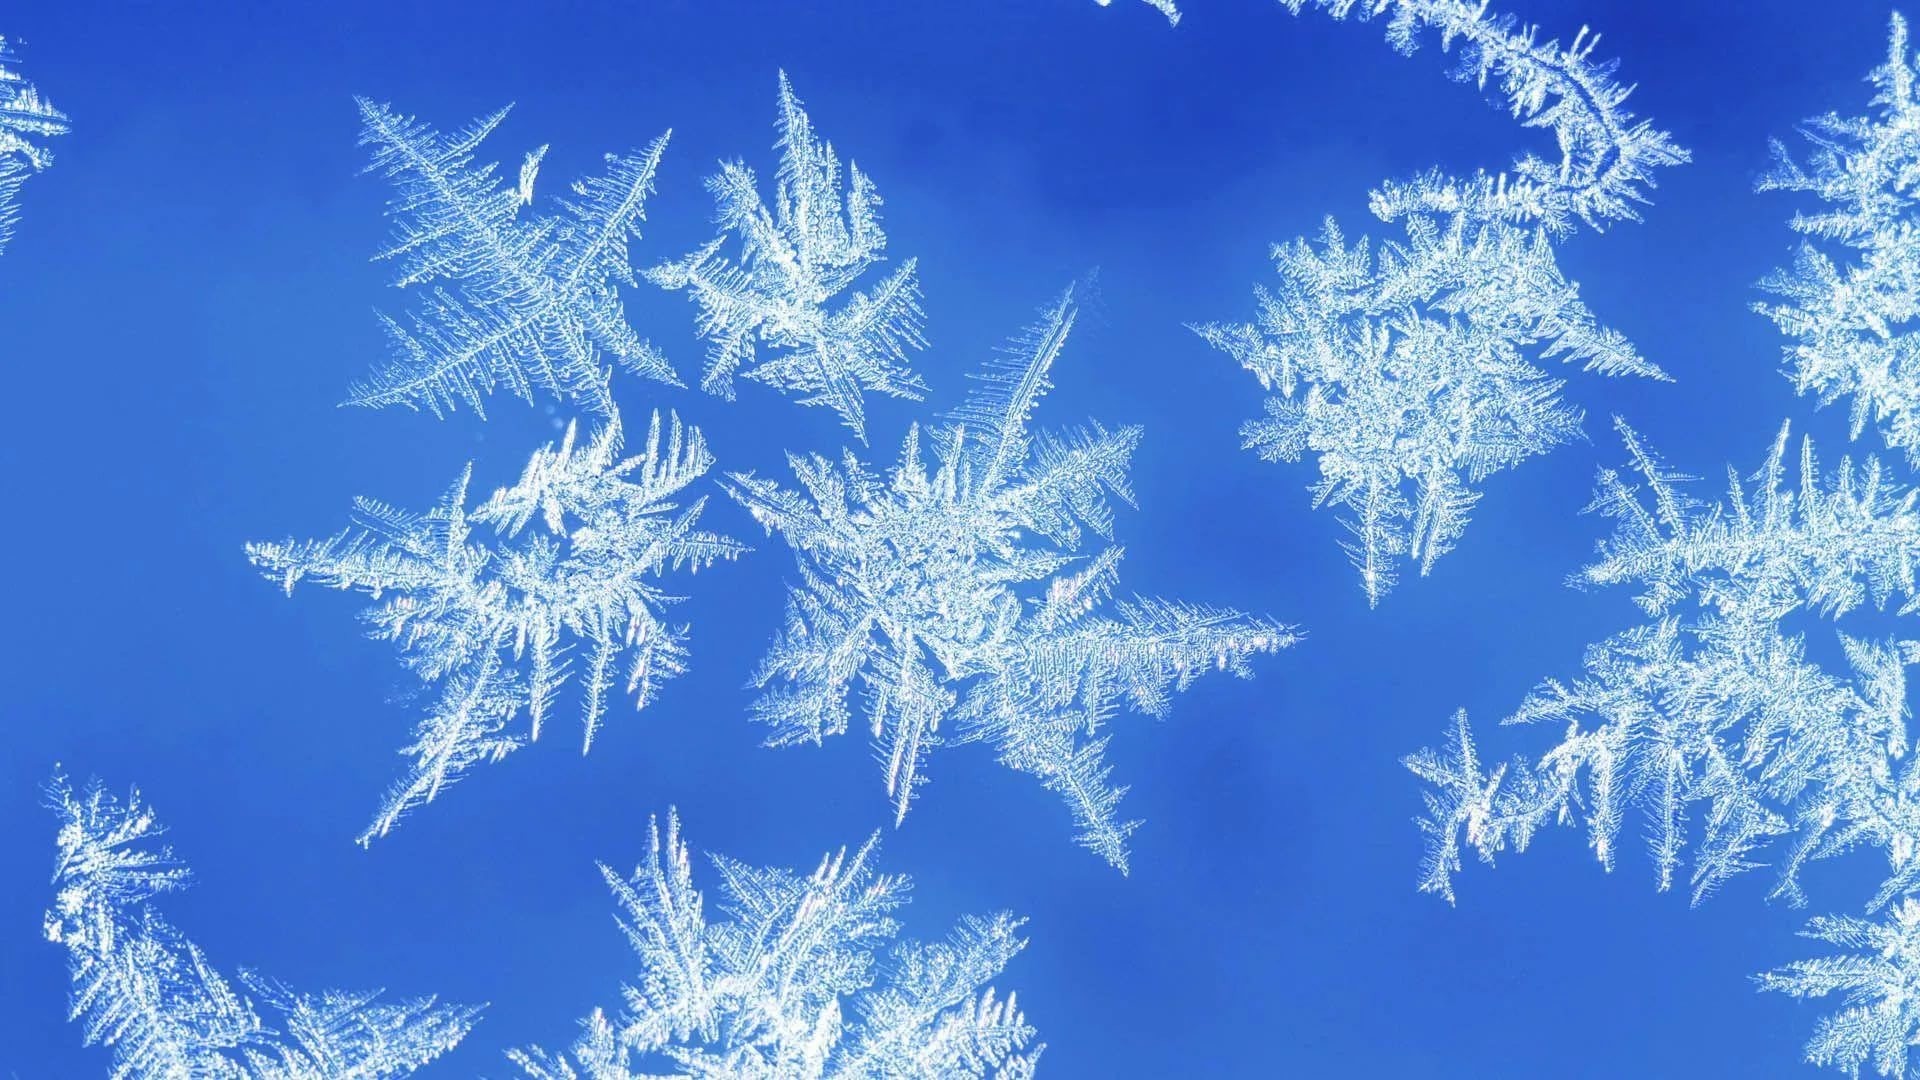 1920x1080 ... Snowflakes Wallpapers and Backgrounds ...